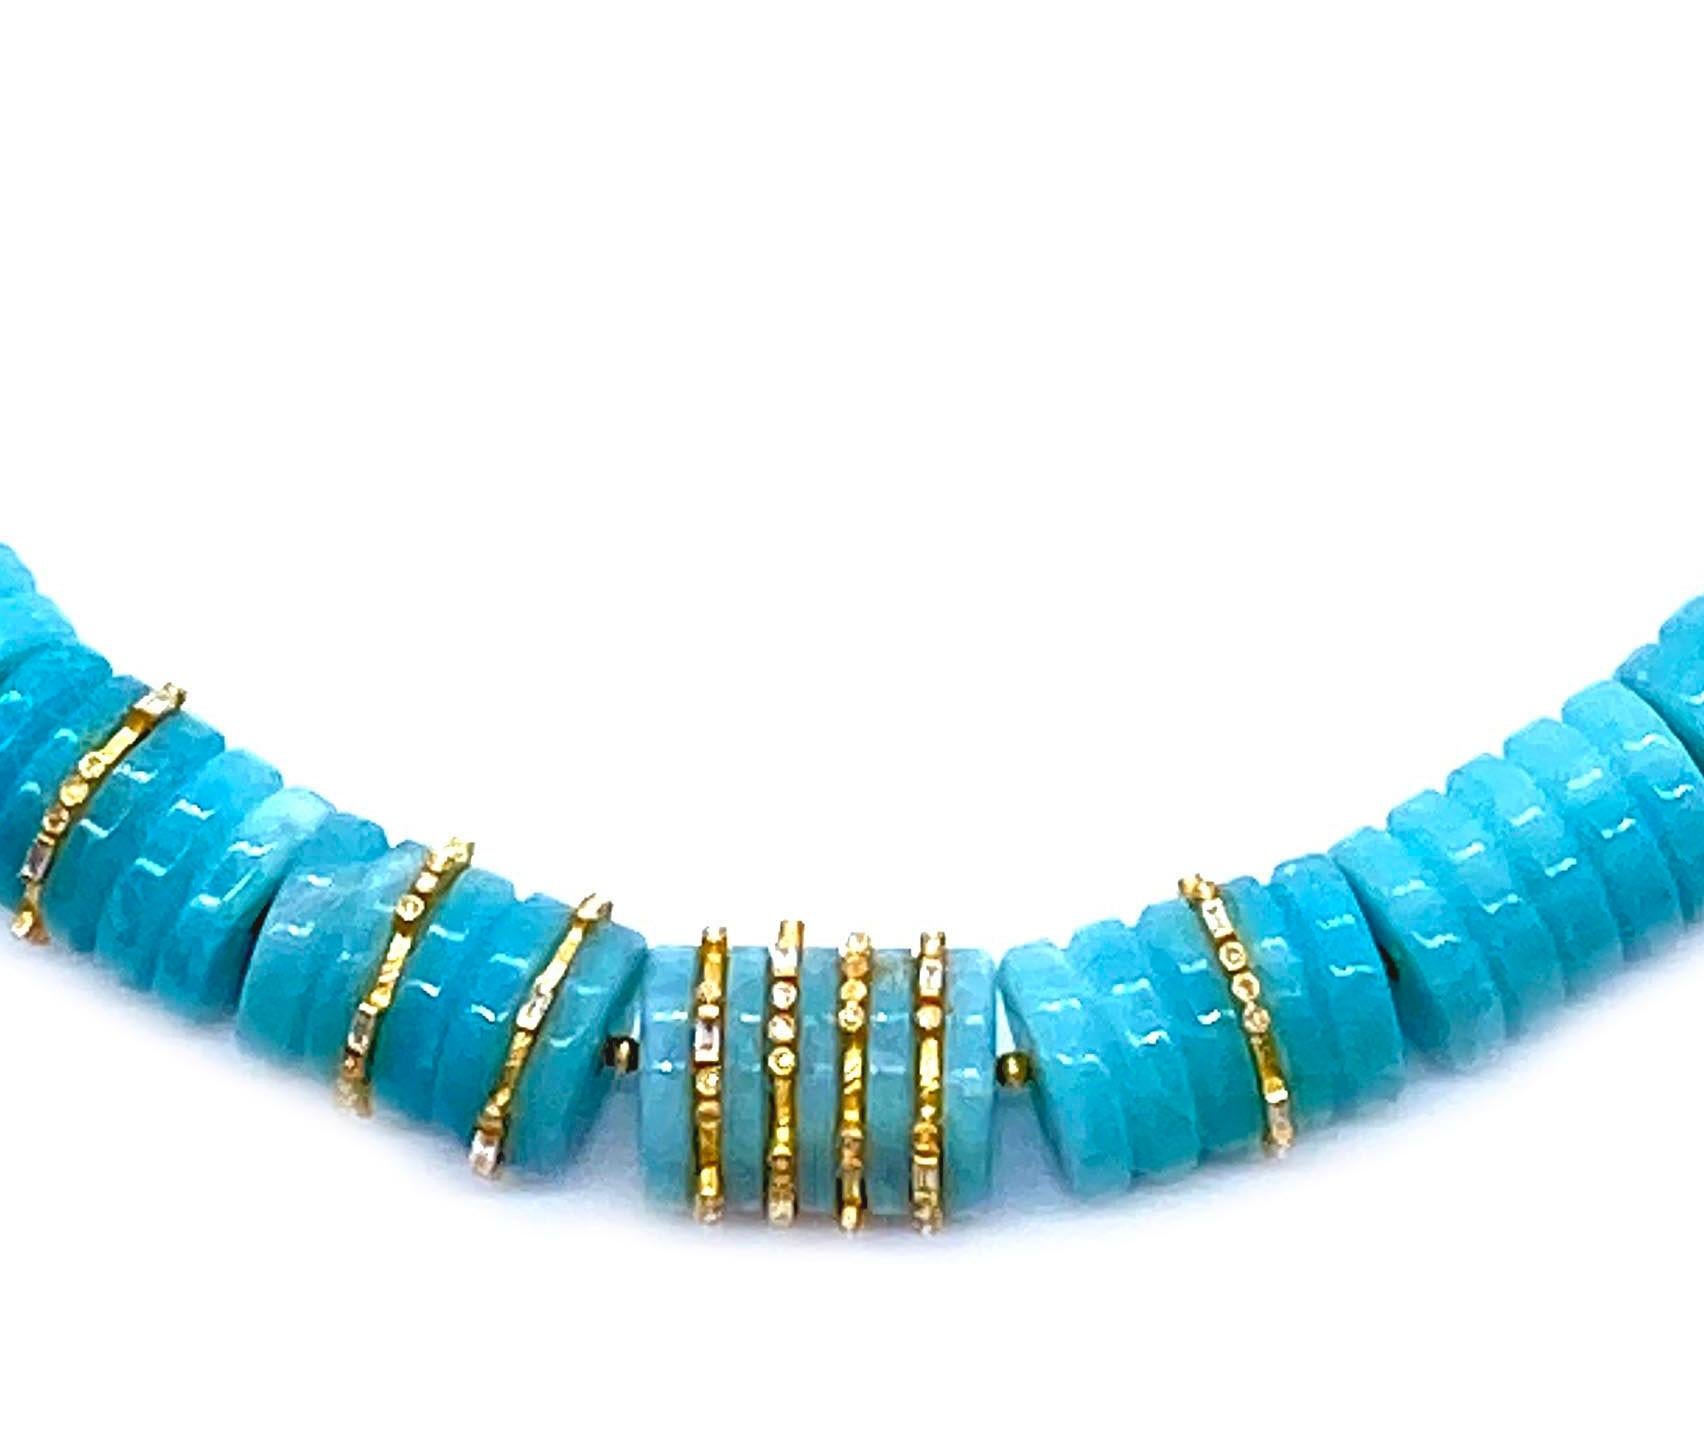 Classic Handmade Aquamarine Beads Coomi 20 Karat Gold Necklace with Gold Beads In New Condition For Sale In Secaucus, NJ